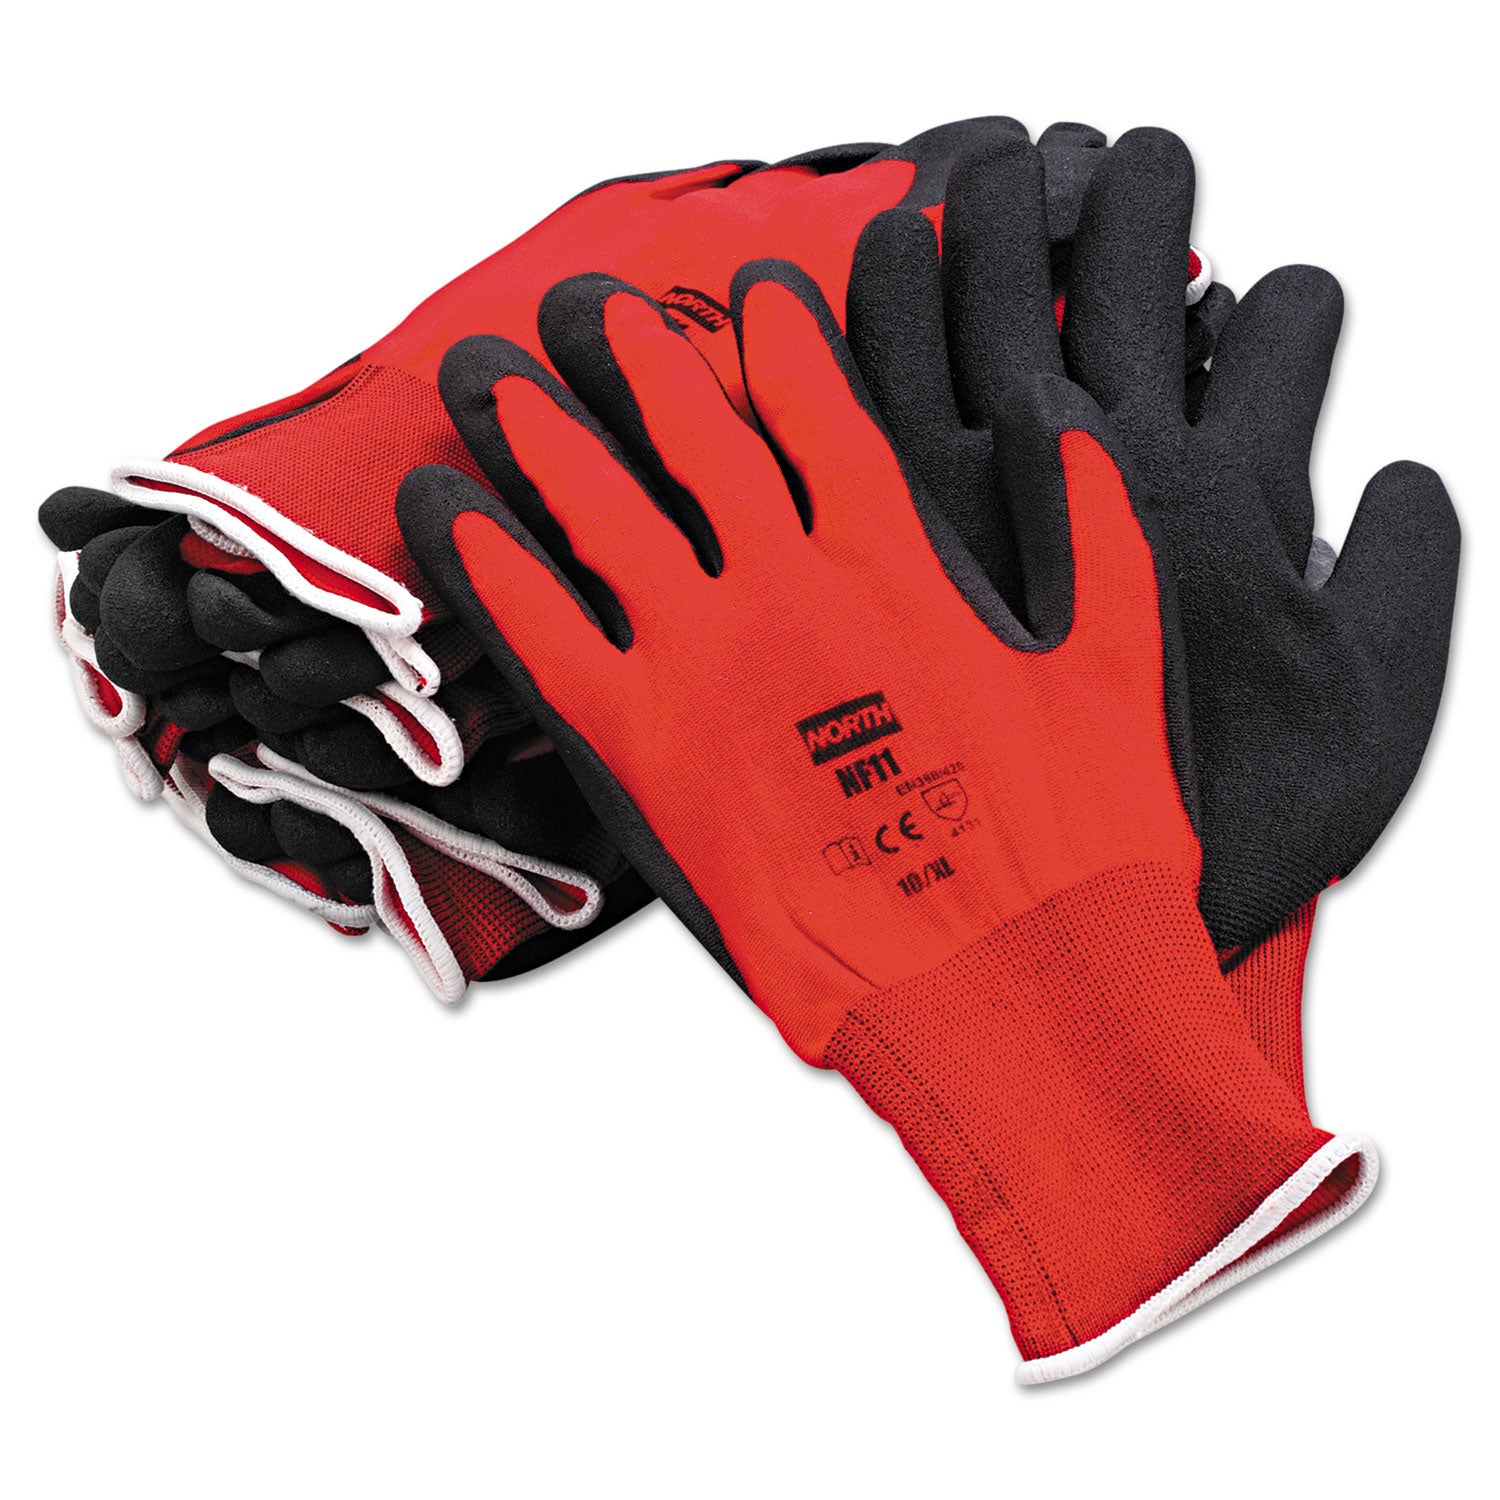 NorthFlex Red Foamed PVC Gloves, Red/Black, Size 10/X-Large, 12 Pairs - 